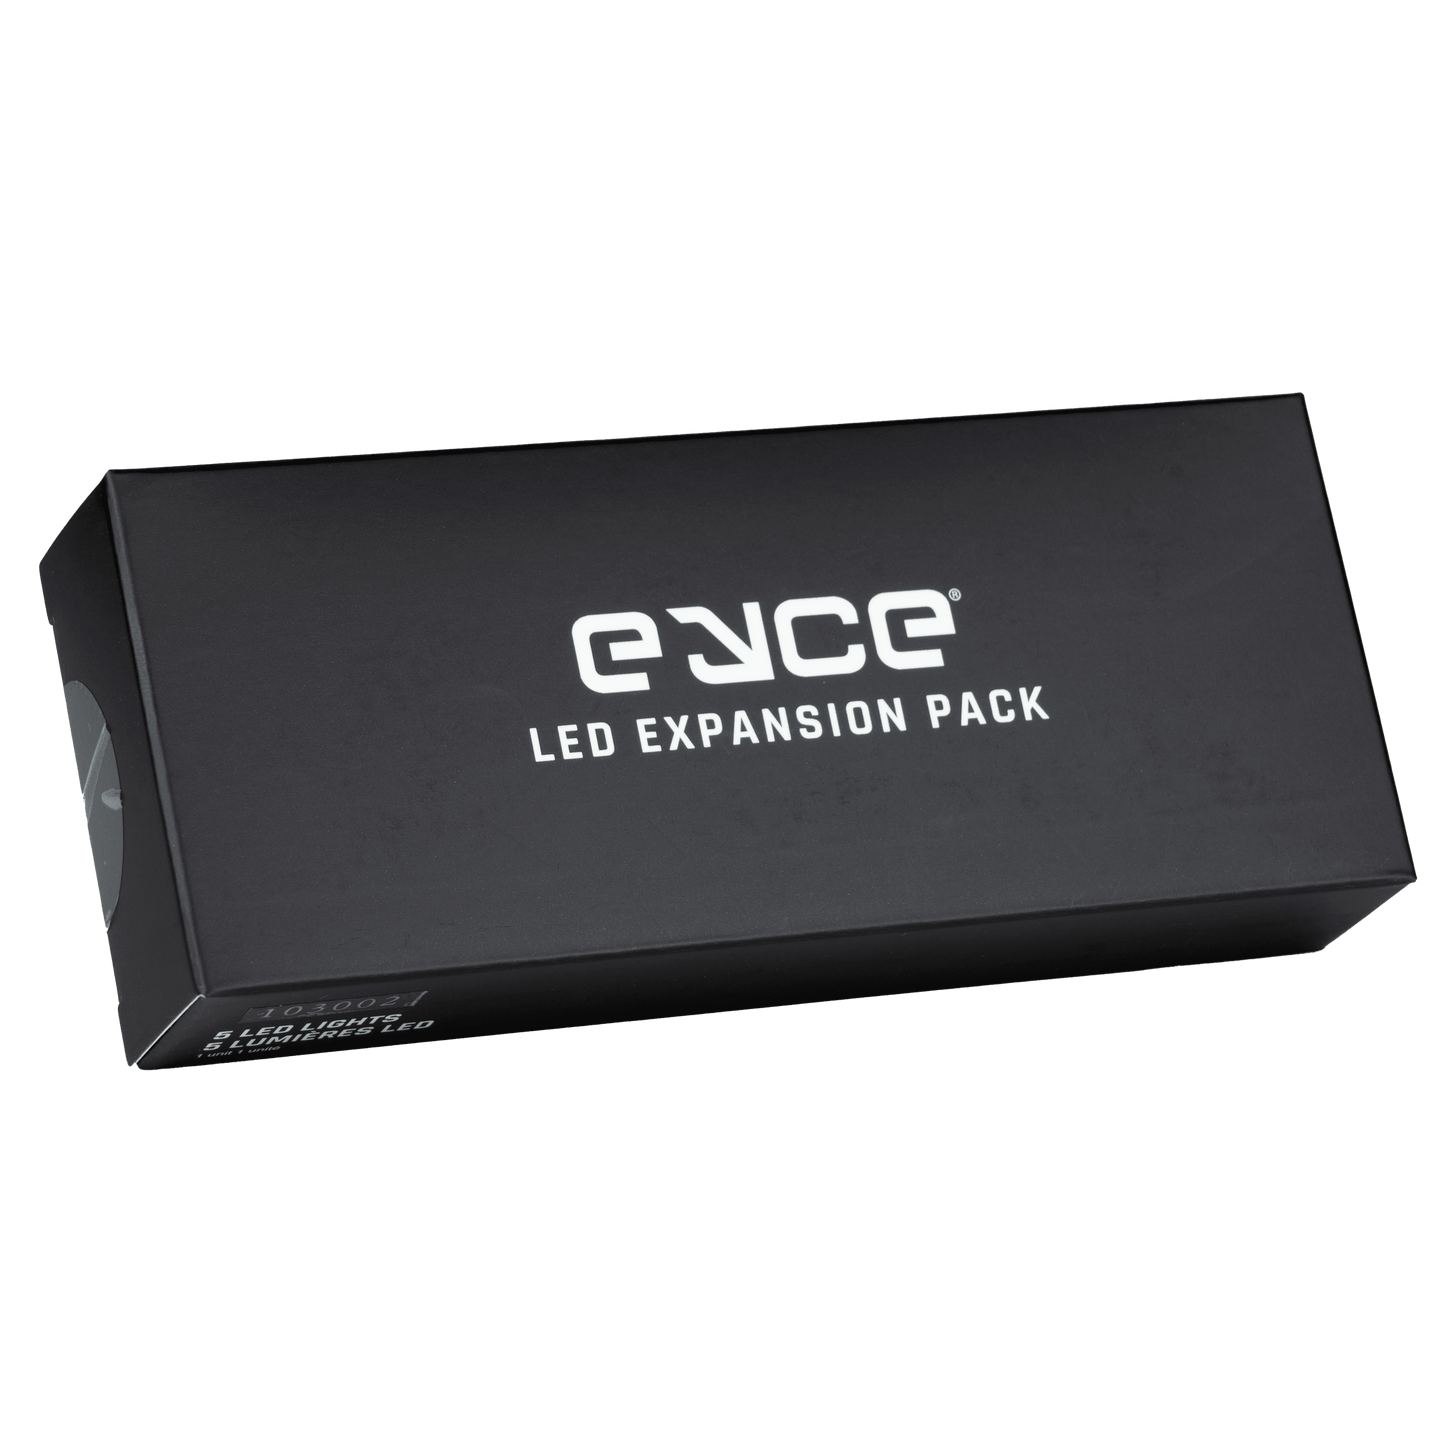 Eyce Spark LED Expansion Pack Accessories Eyce Molds 